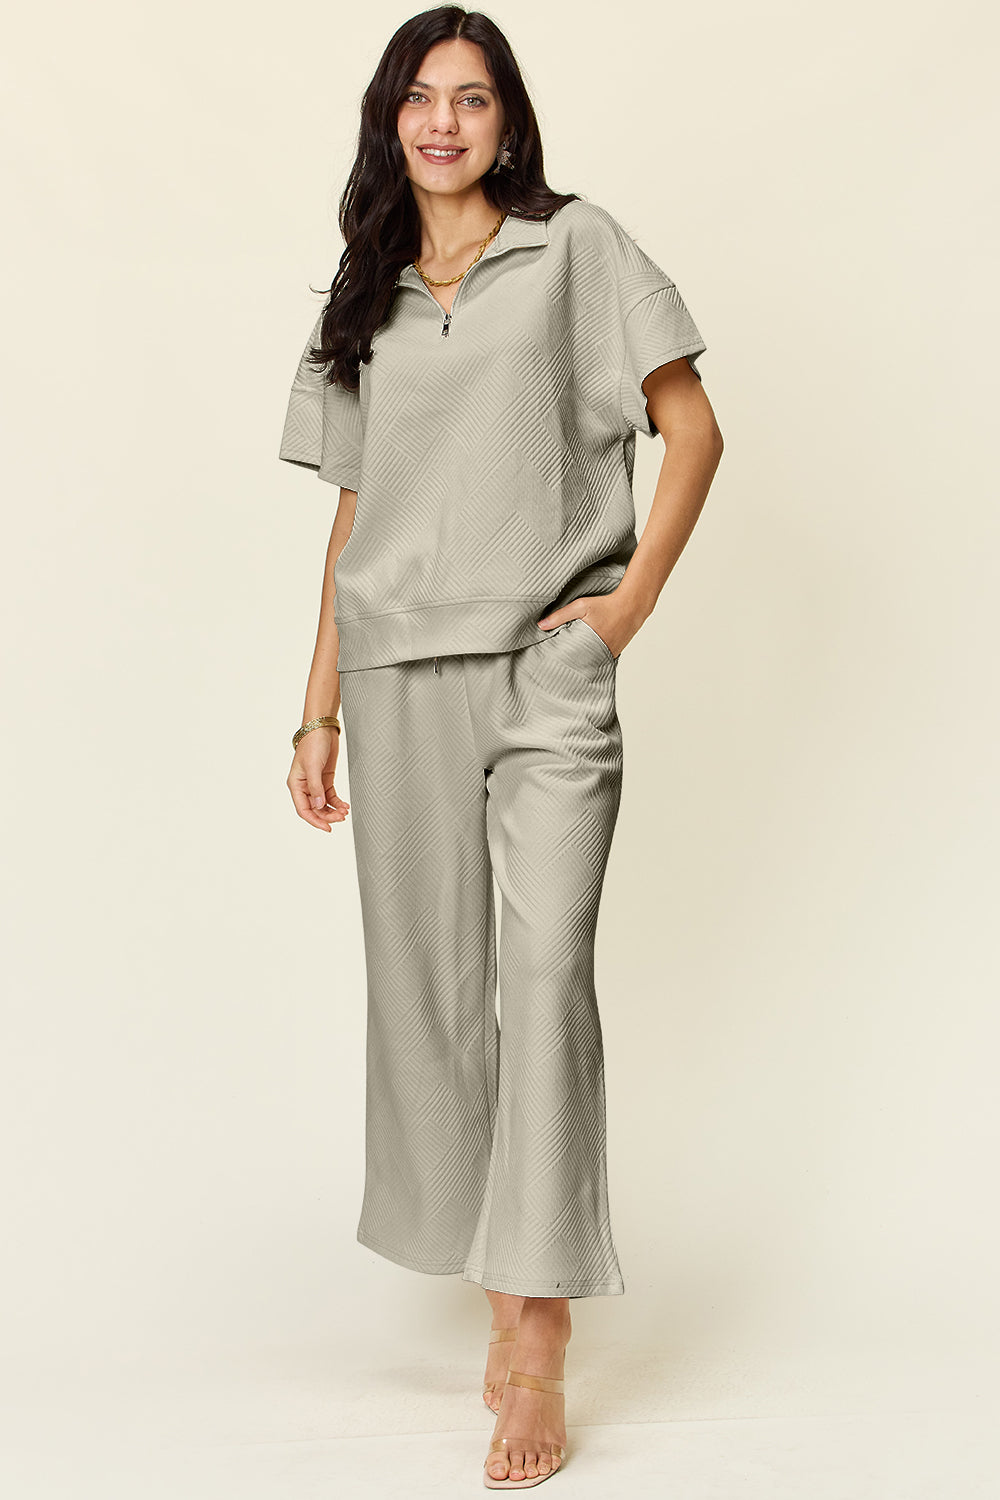 Pre-Order Double Take Full Size Texture Half Zip Short Sleeve Top and Pants Set